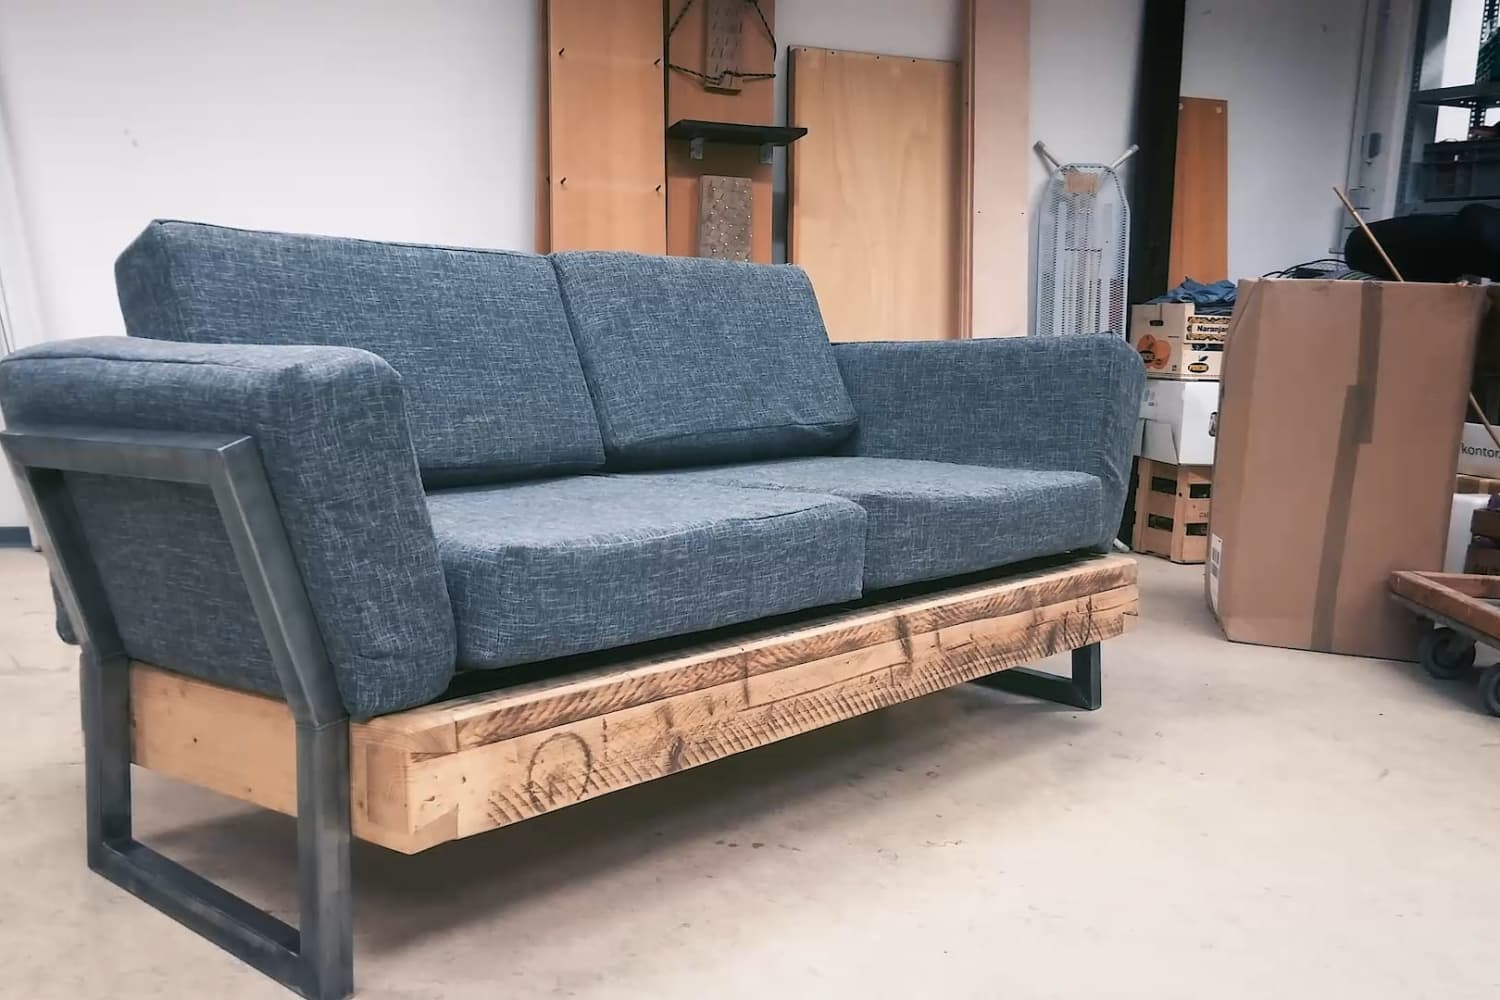 spiral Farmer vertex One Reddit User Built This DIY Reclaimed Sofa for $100 | Apartment Therapy